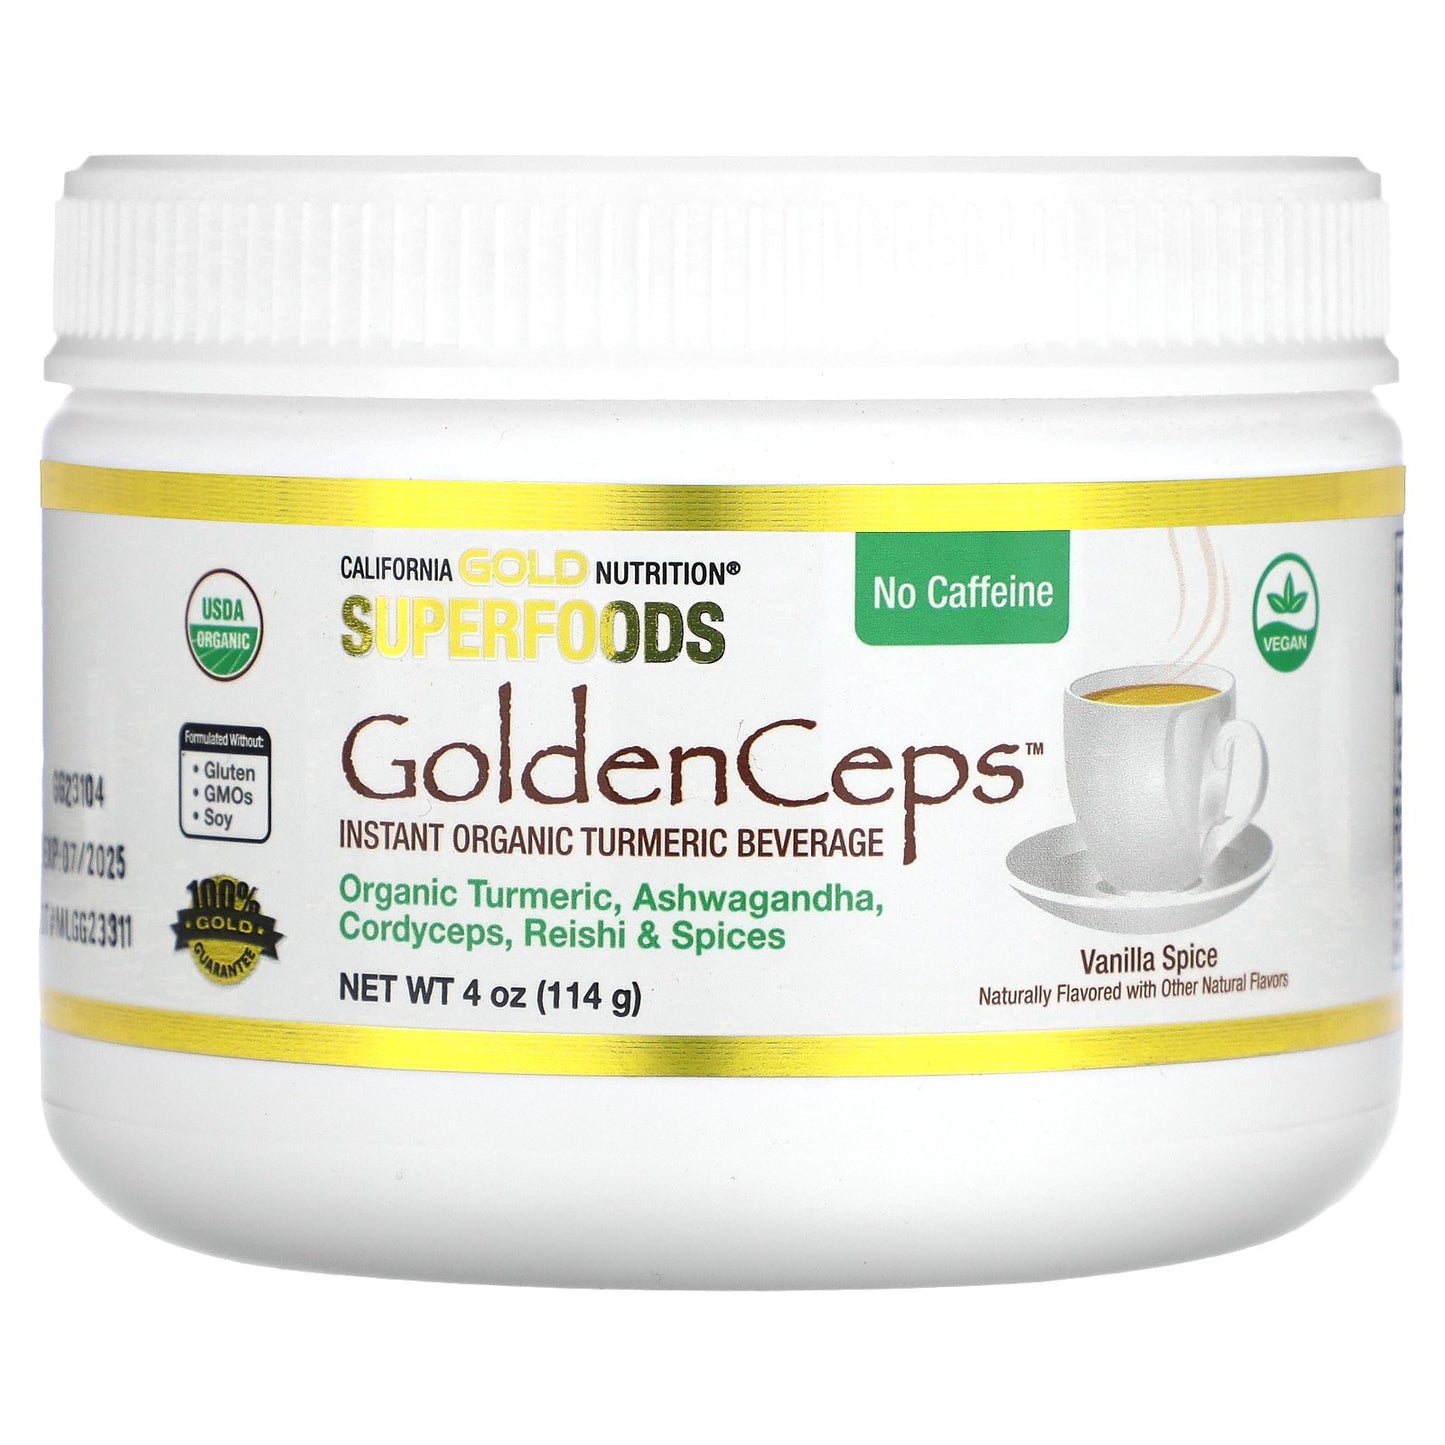 California Gold Nutrition, Superfoods, GoldenCeps, Organic Turmeric with Adaptogens, 4 oz (114 g)